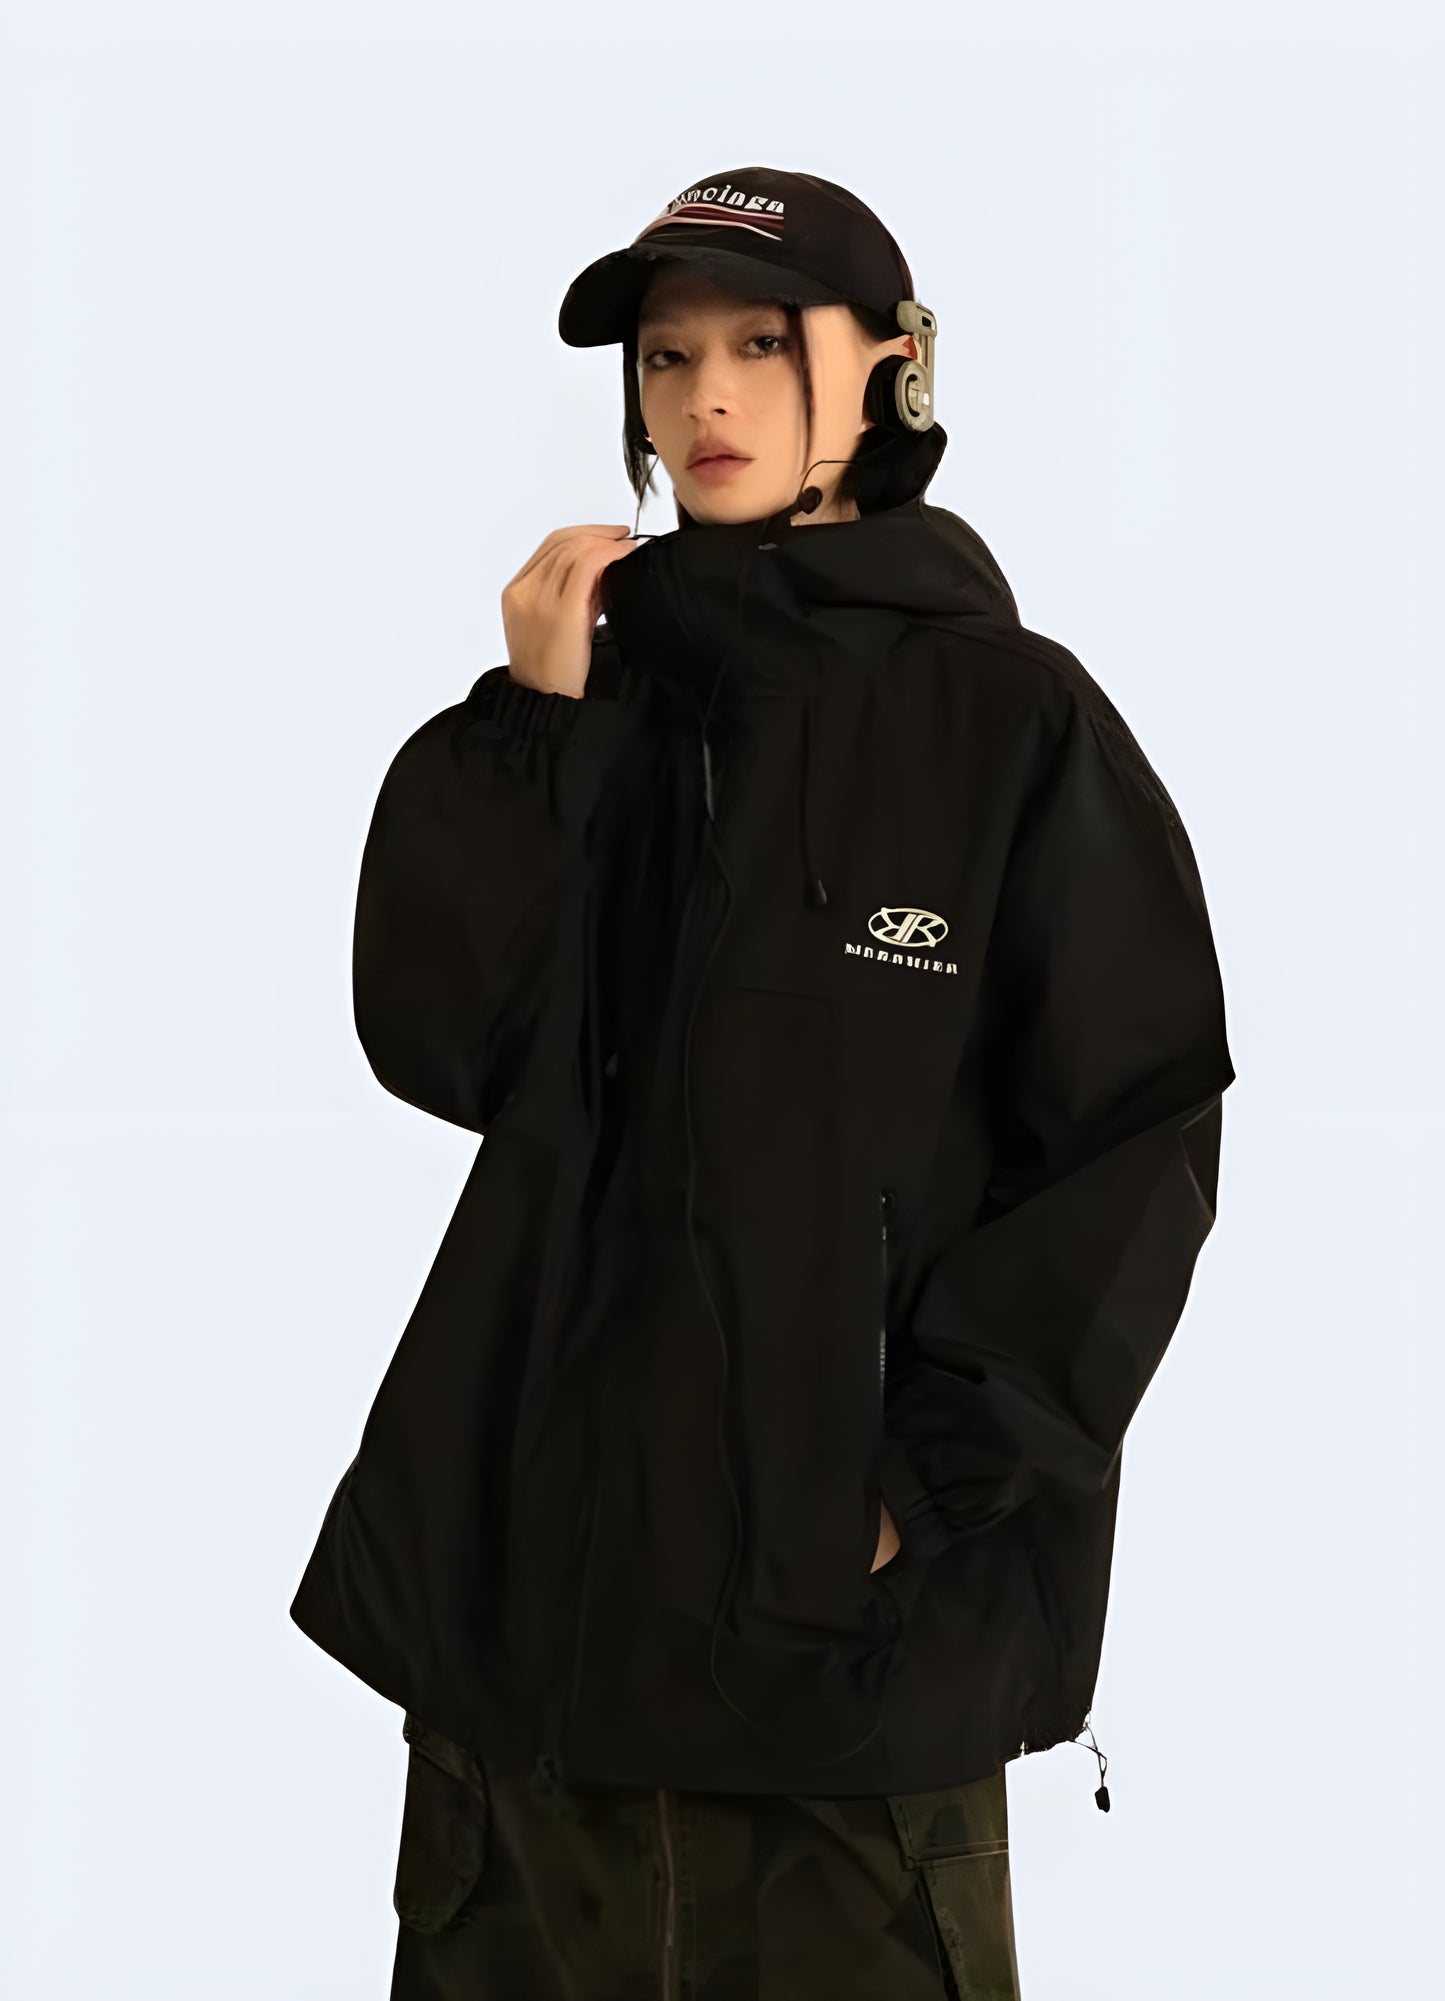 Full zip front closure covered by storm flap women windbreaker jacket.